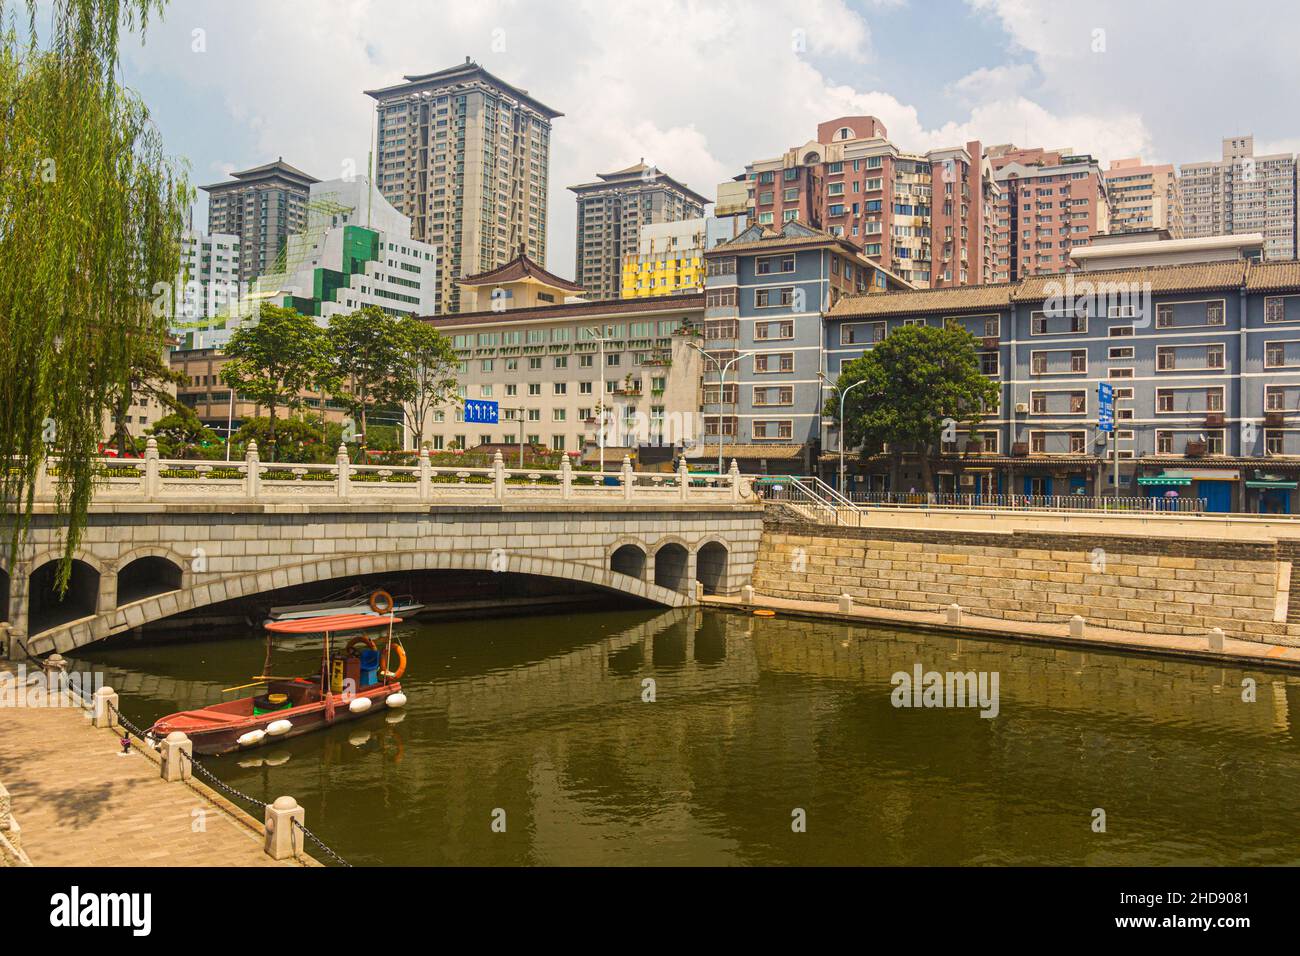 Water moat around the old town of Xi'an, China Stock Photo